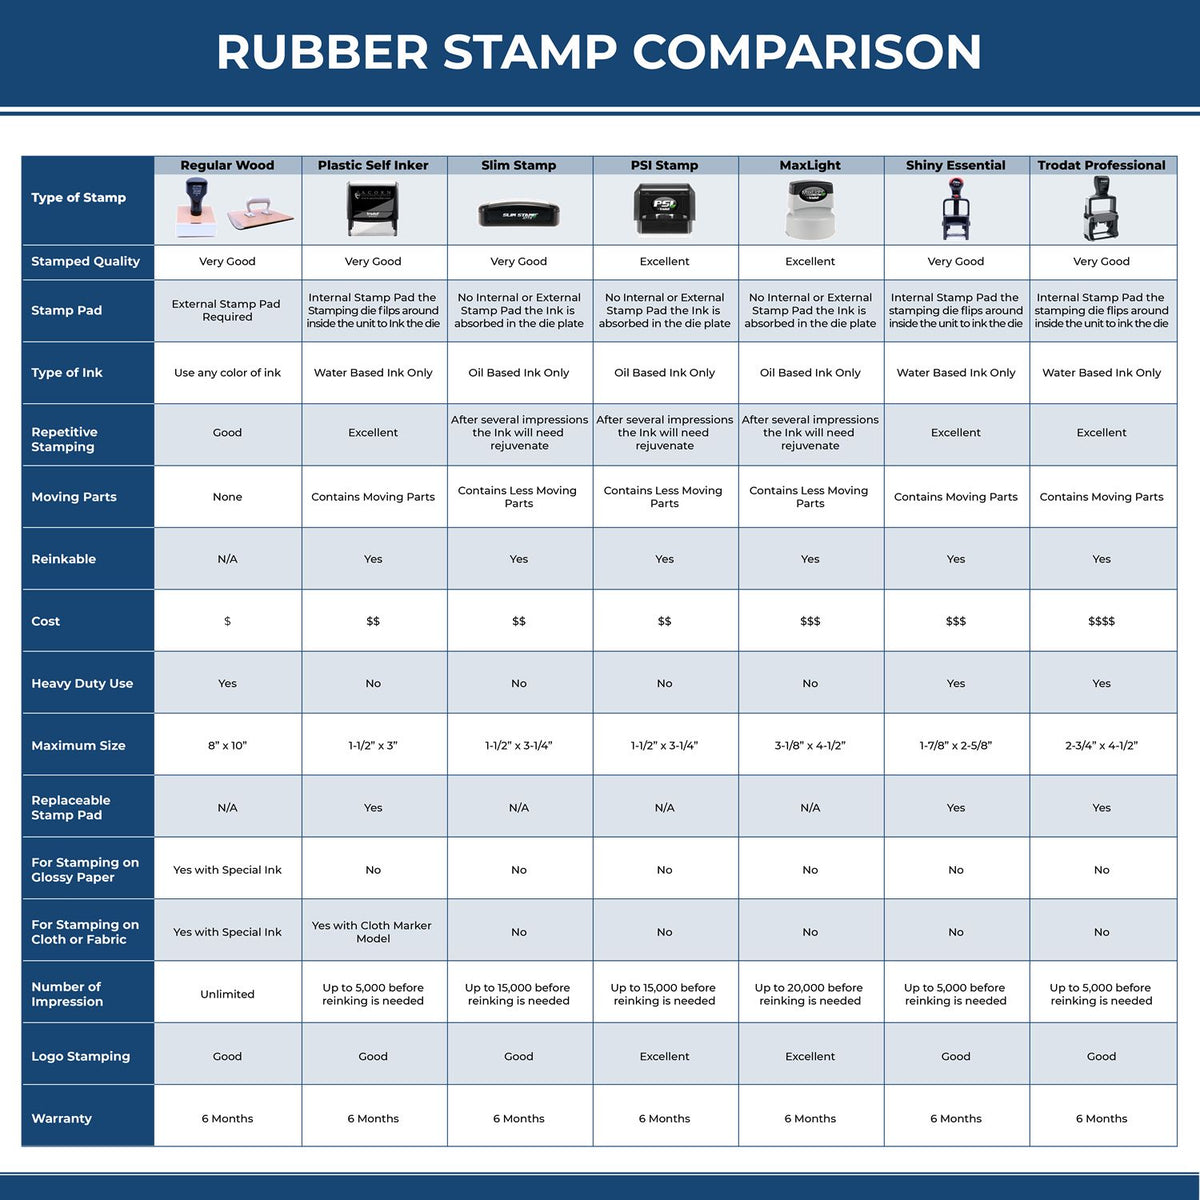 A comparison chart for the different types of mount models available for the Heavy-Duty Kentucky Rectangular Notary Stamp.